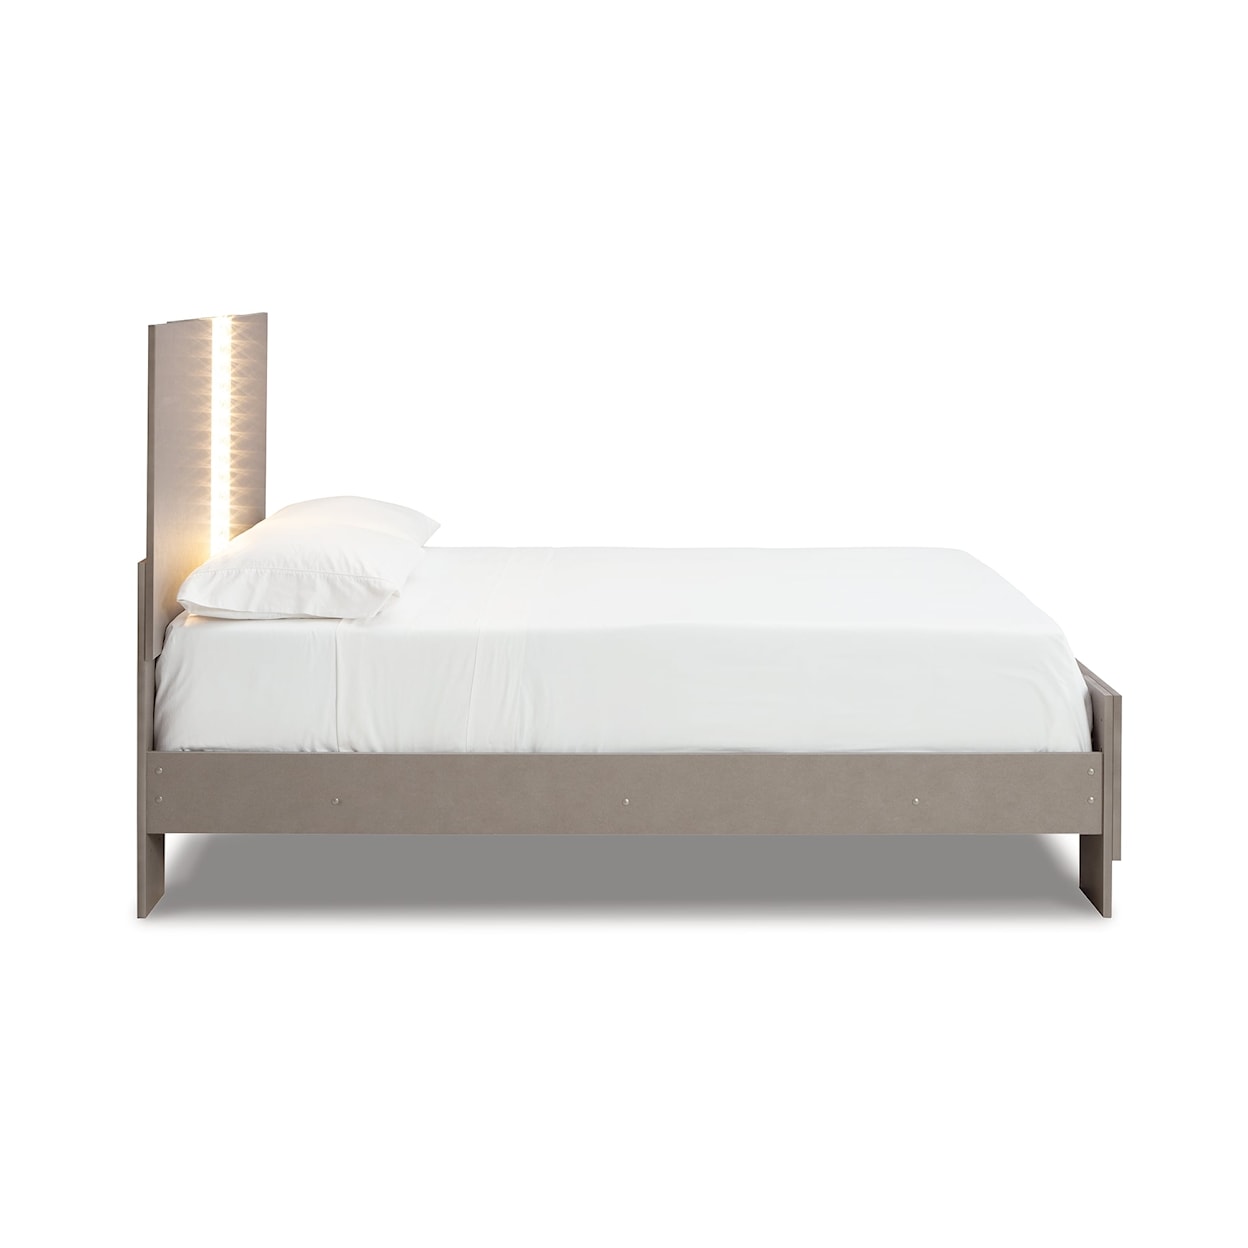 Signature Design by Ashley Surancha Queen Panel Bed